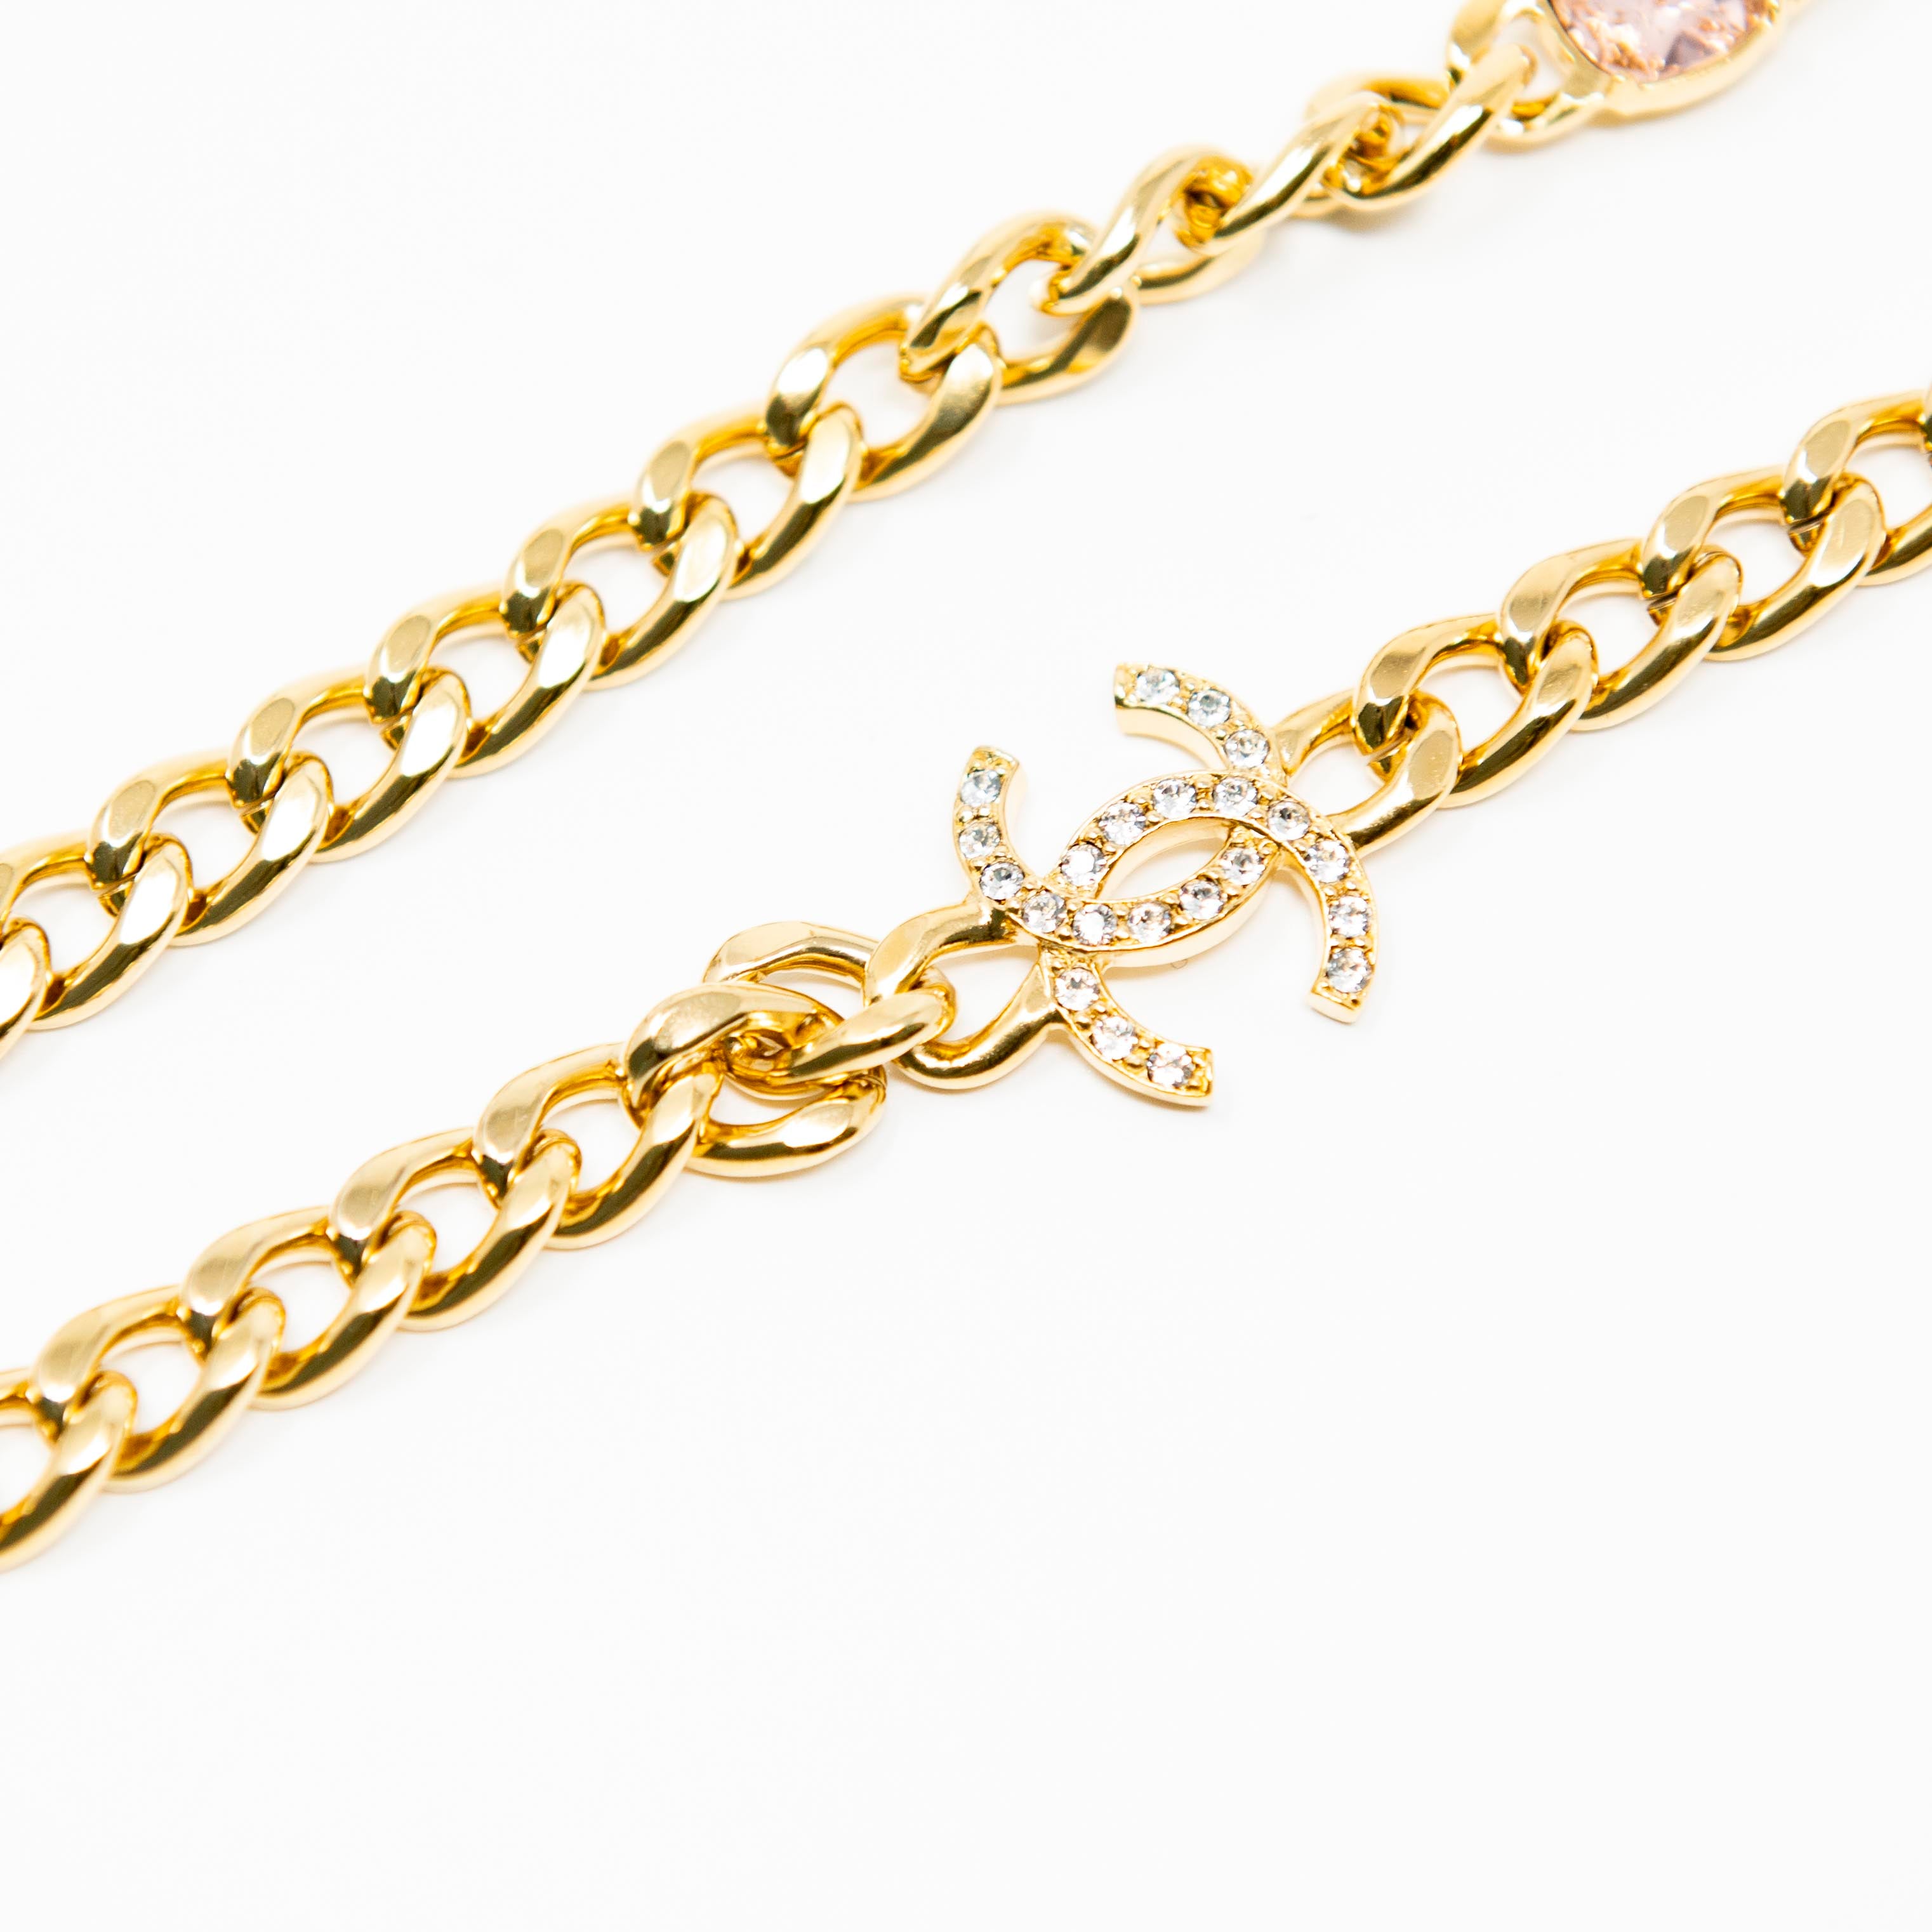 Chanel Crystal CC Long Chain Belt/Necklace